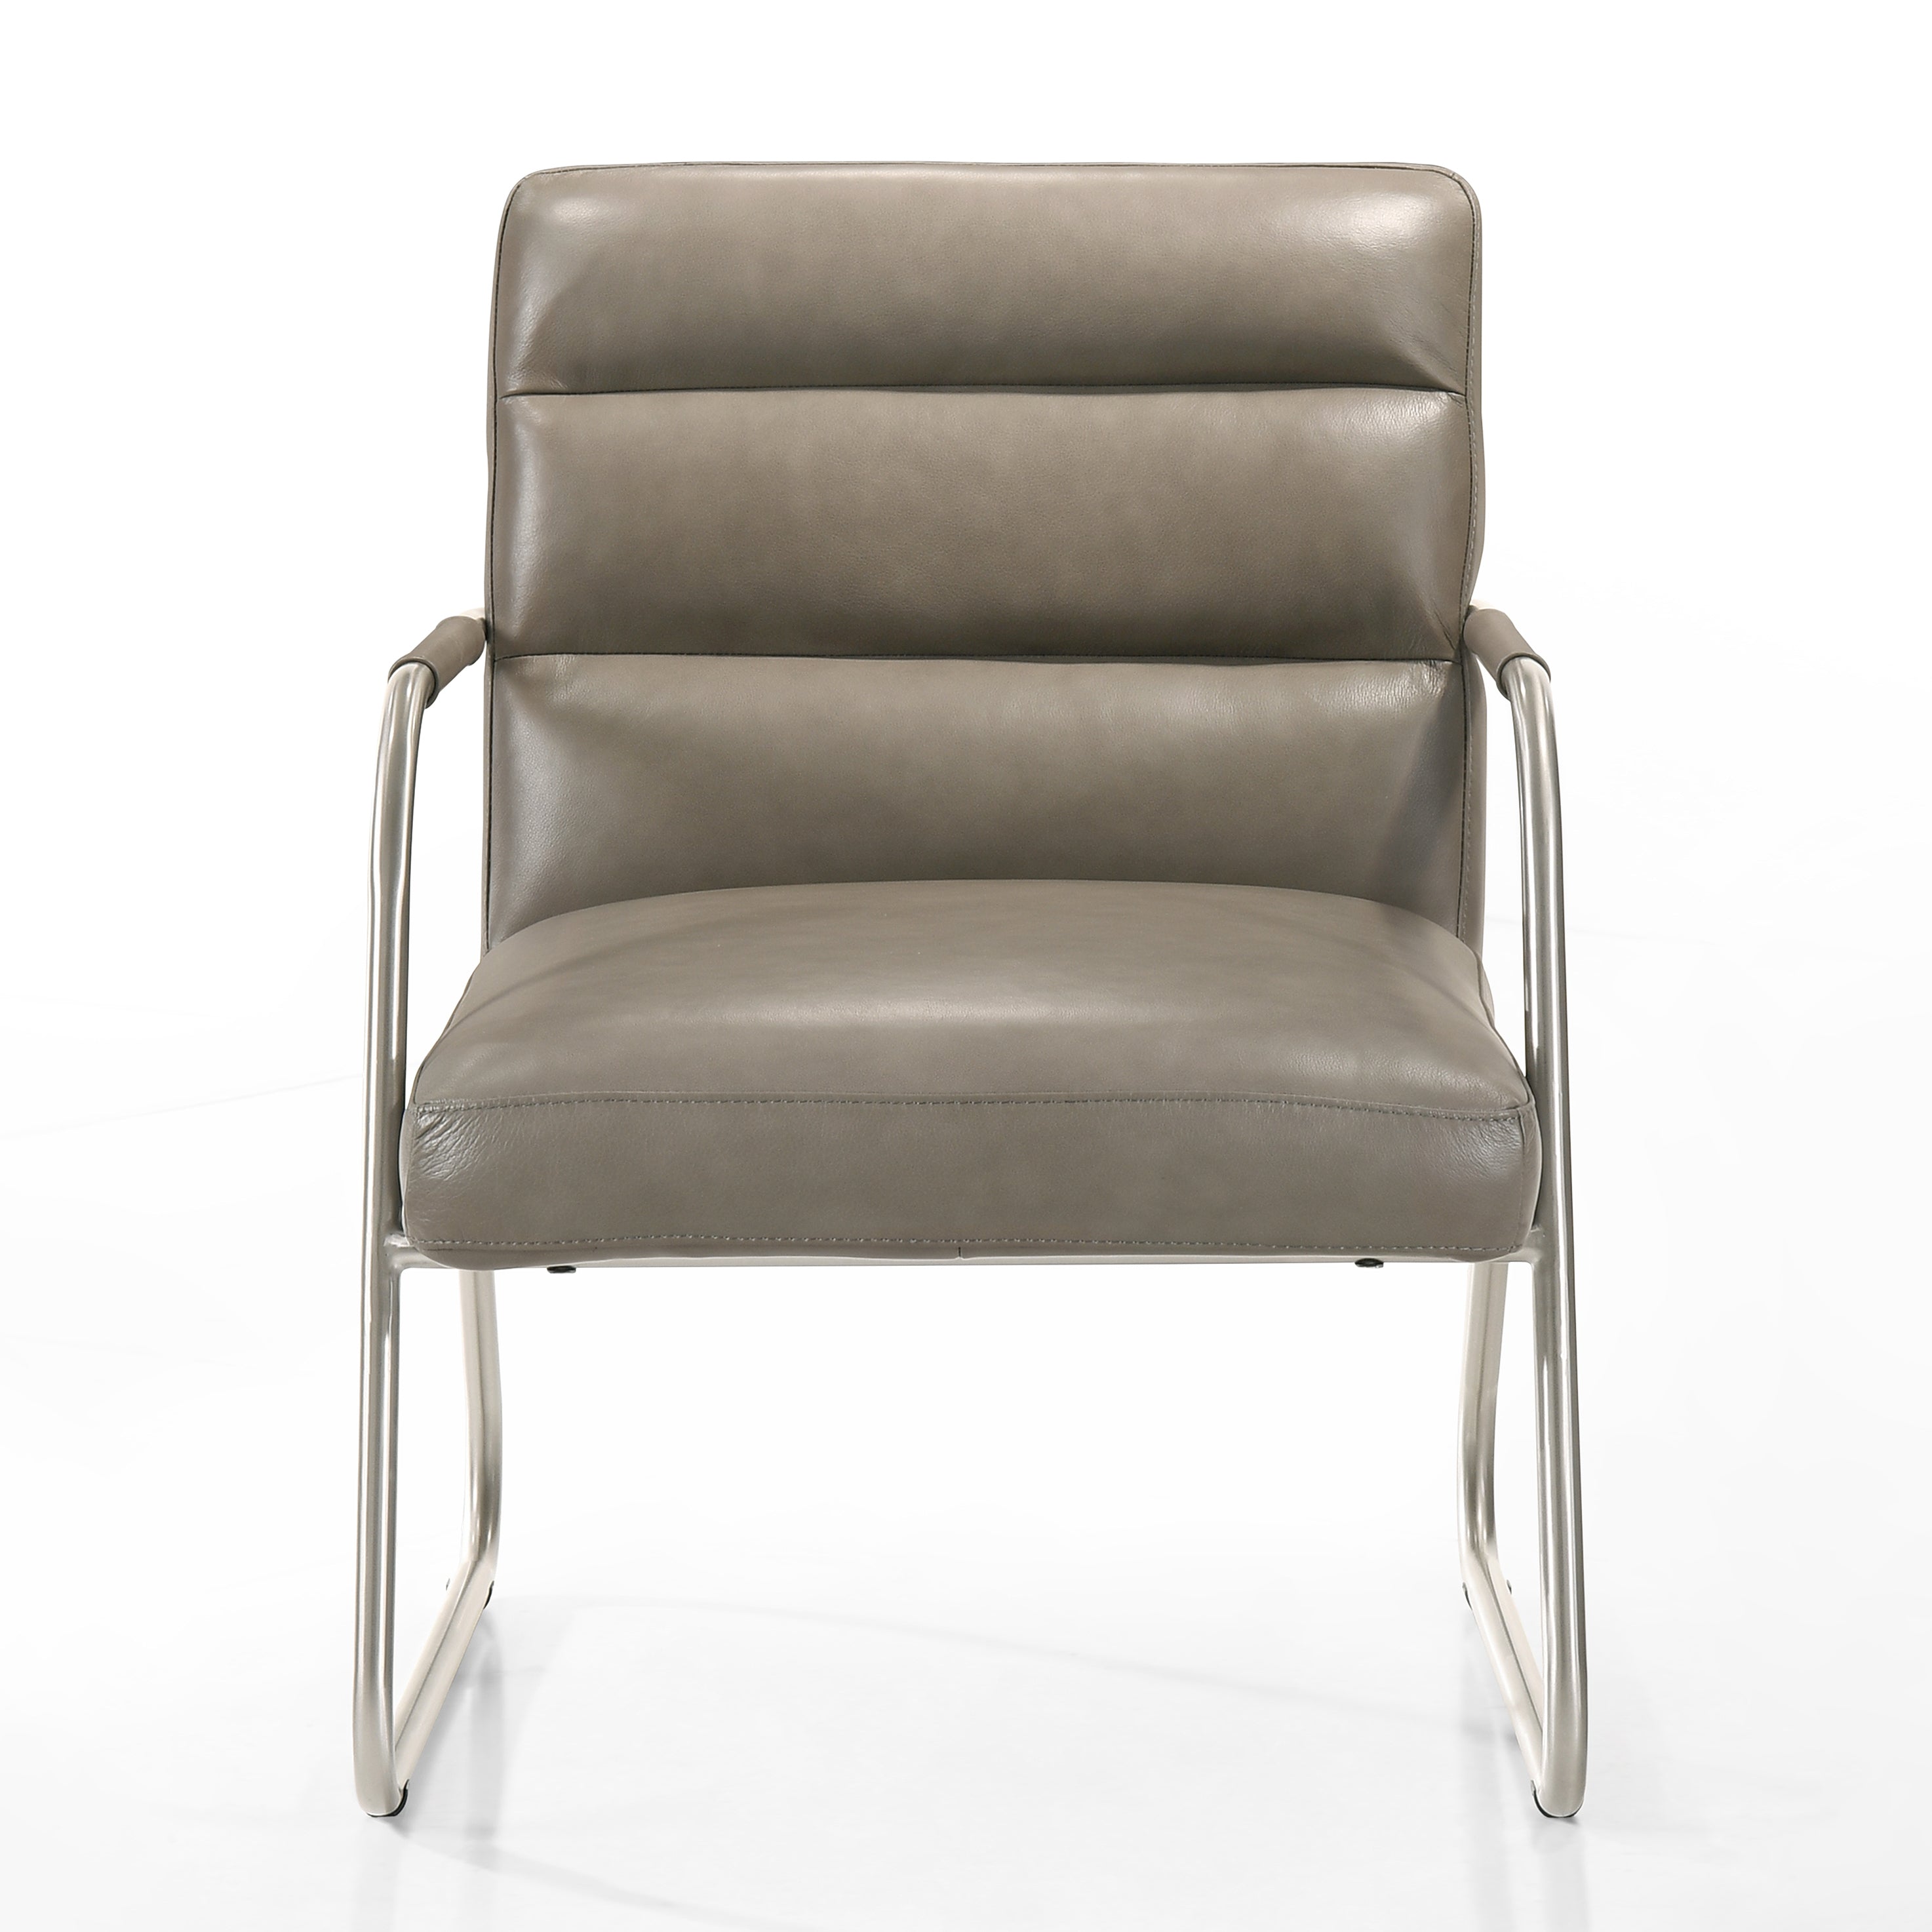 Spencer Stainless Steel Leather Lounge Accent Chair, Grey